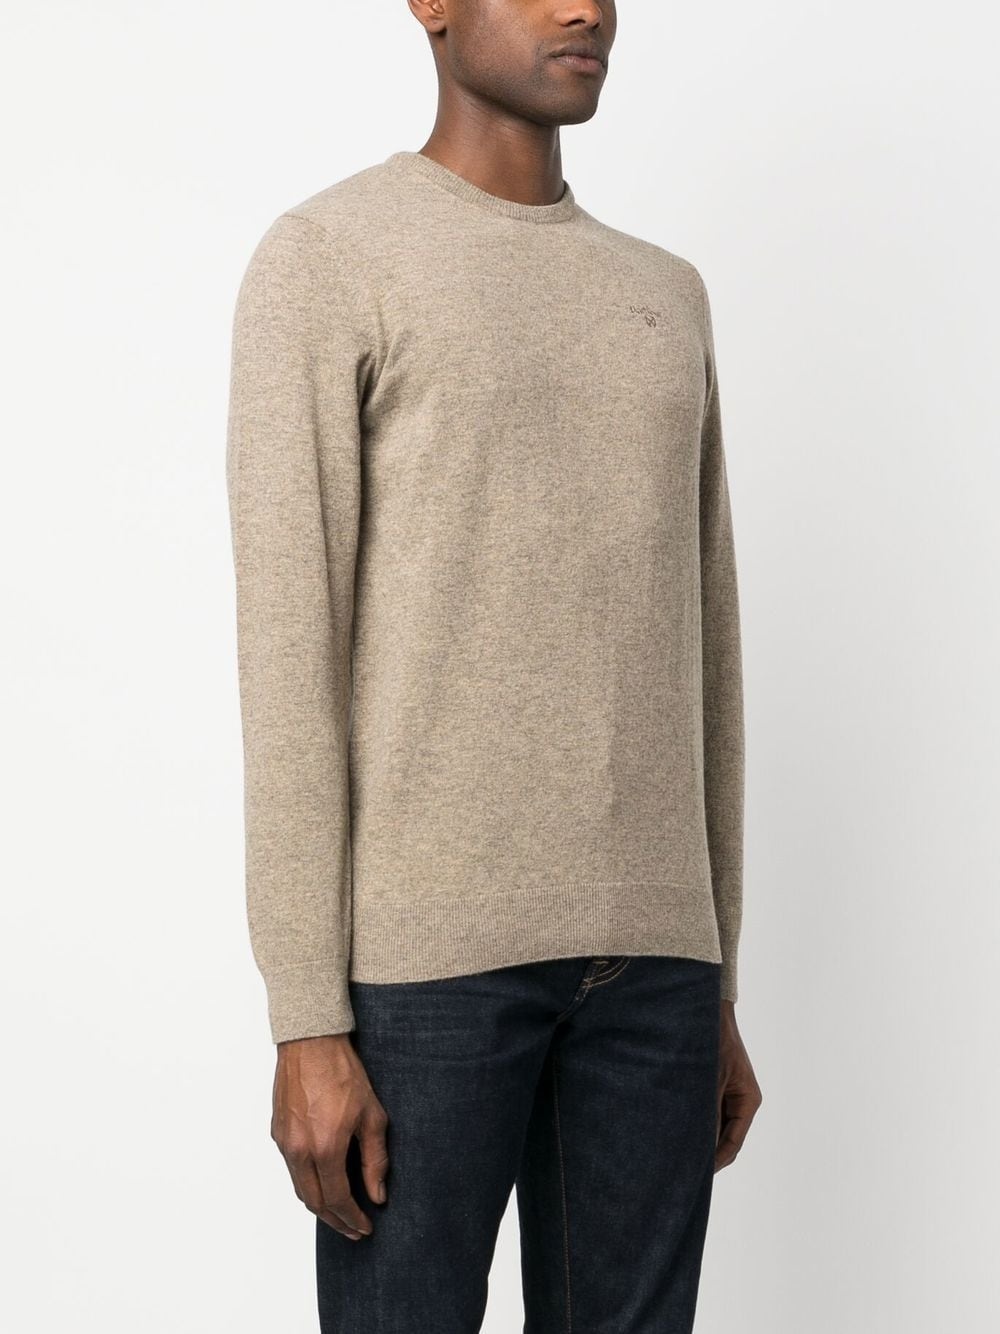 embroidered-logo wool jumper - 6